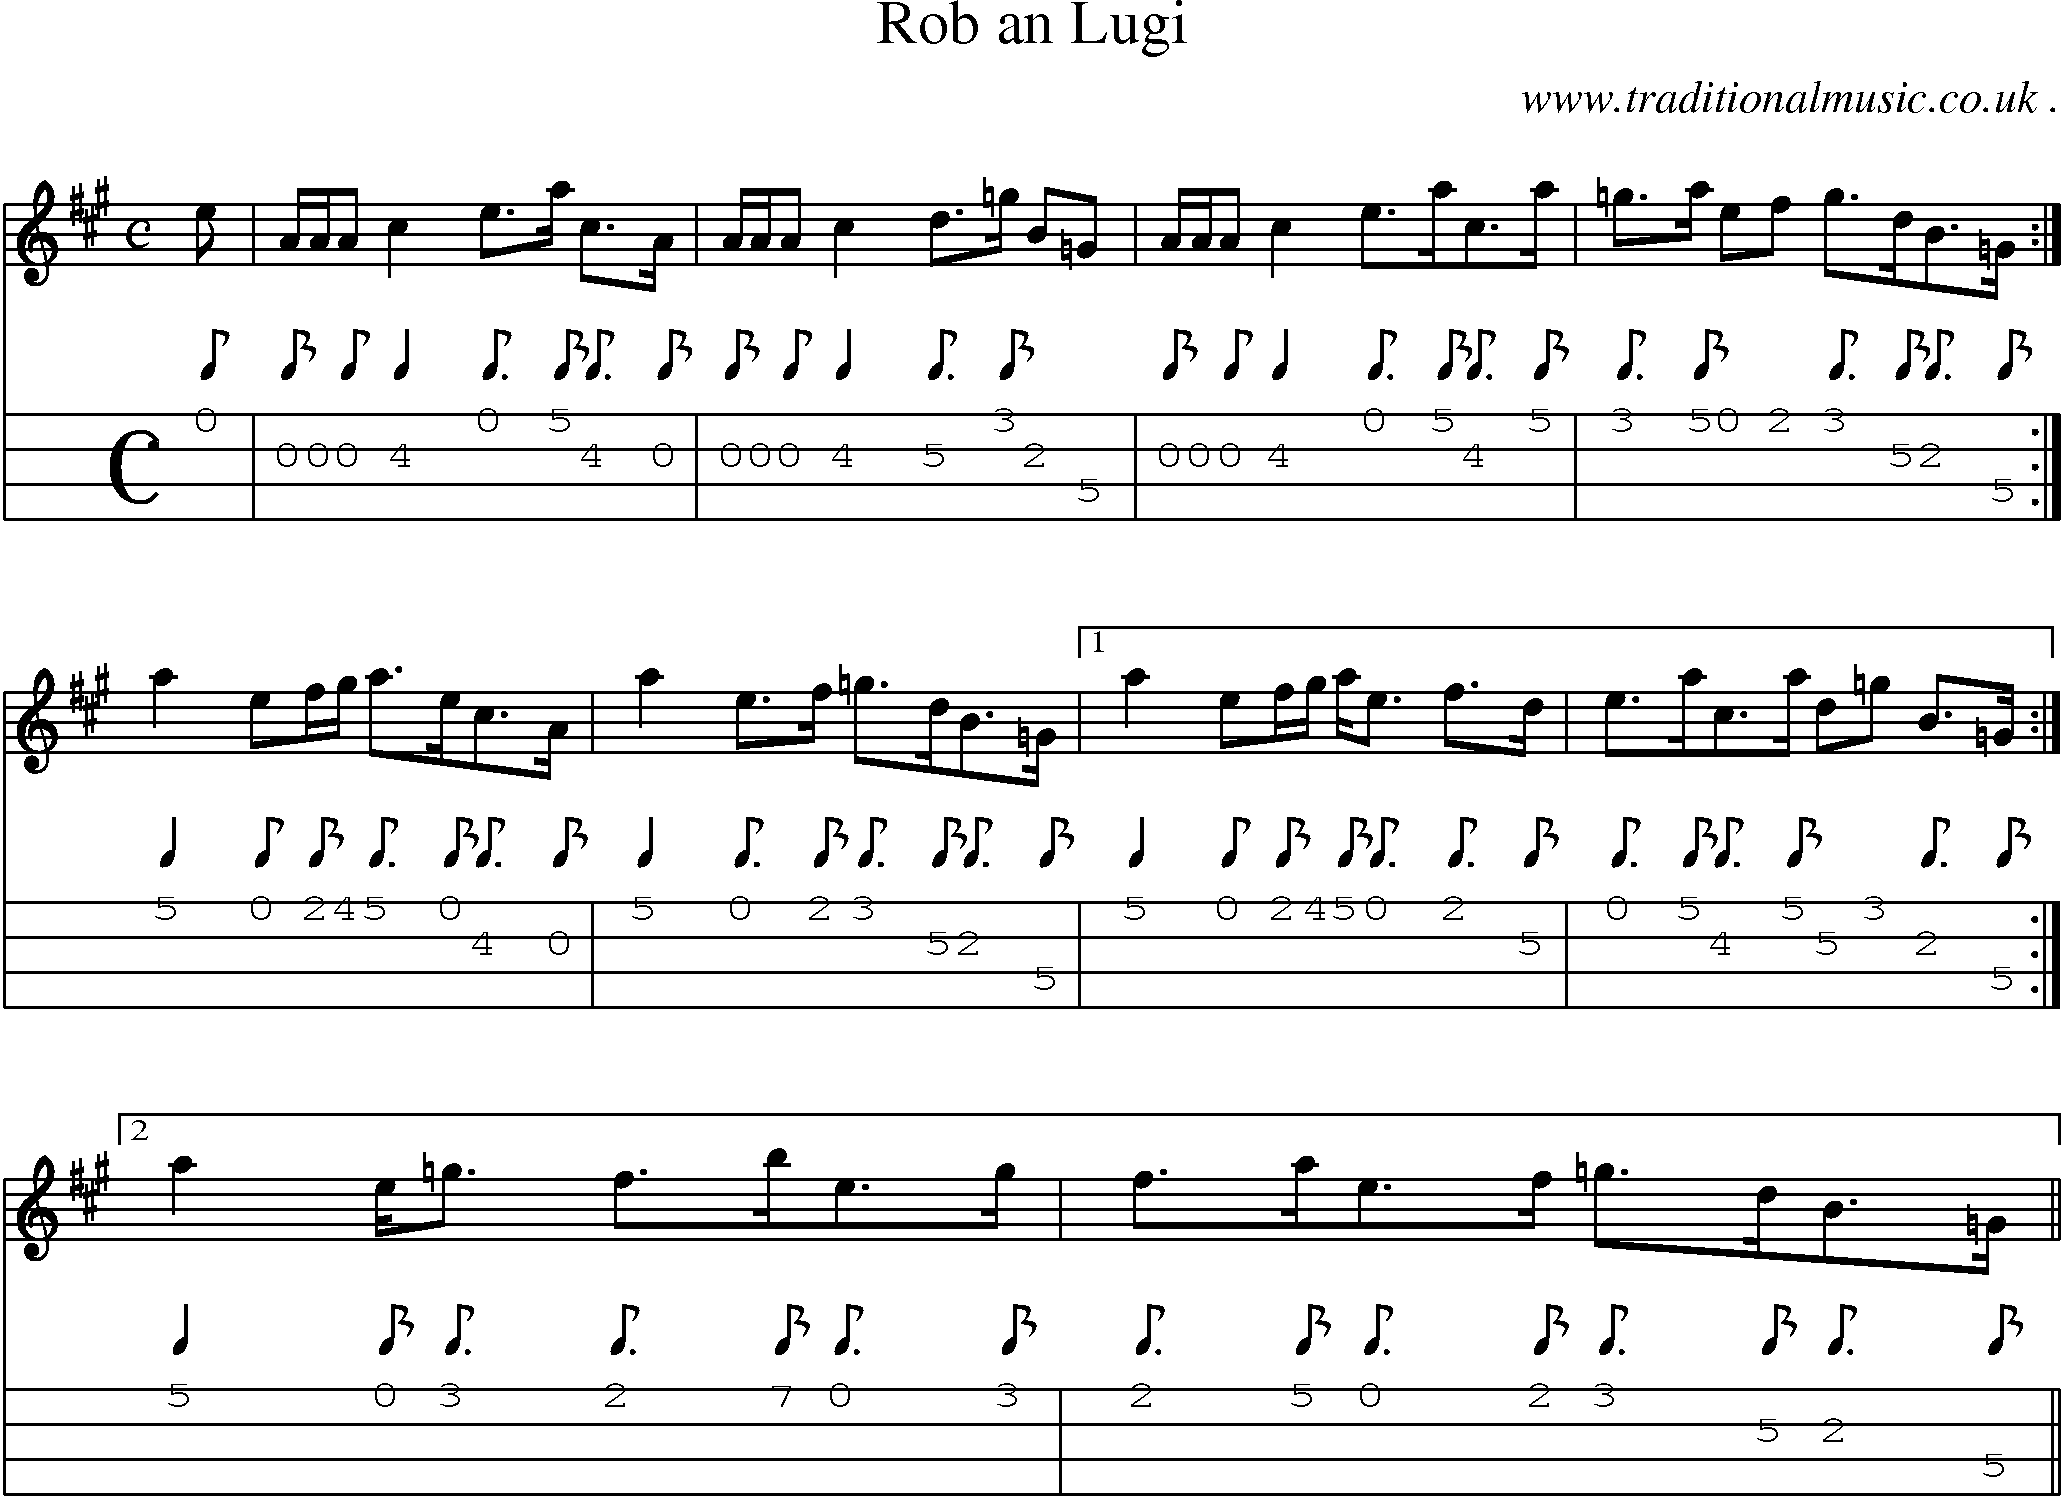 Sheet-music  score, Chords and Mandolin Tabs for Rob An Lugi